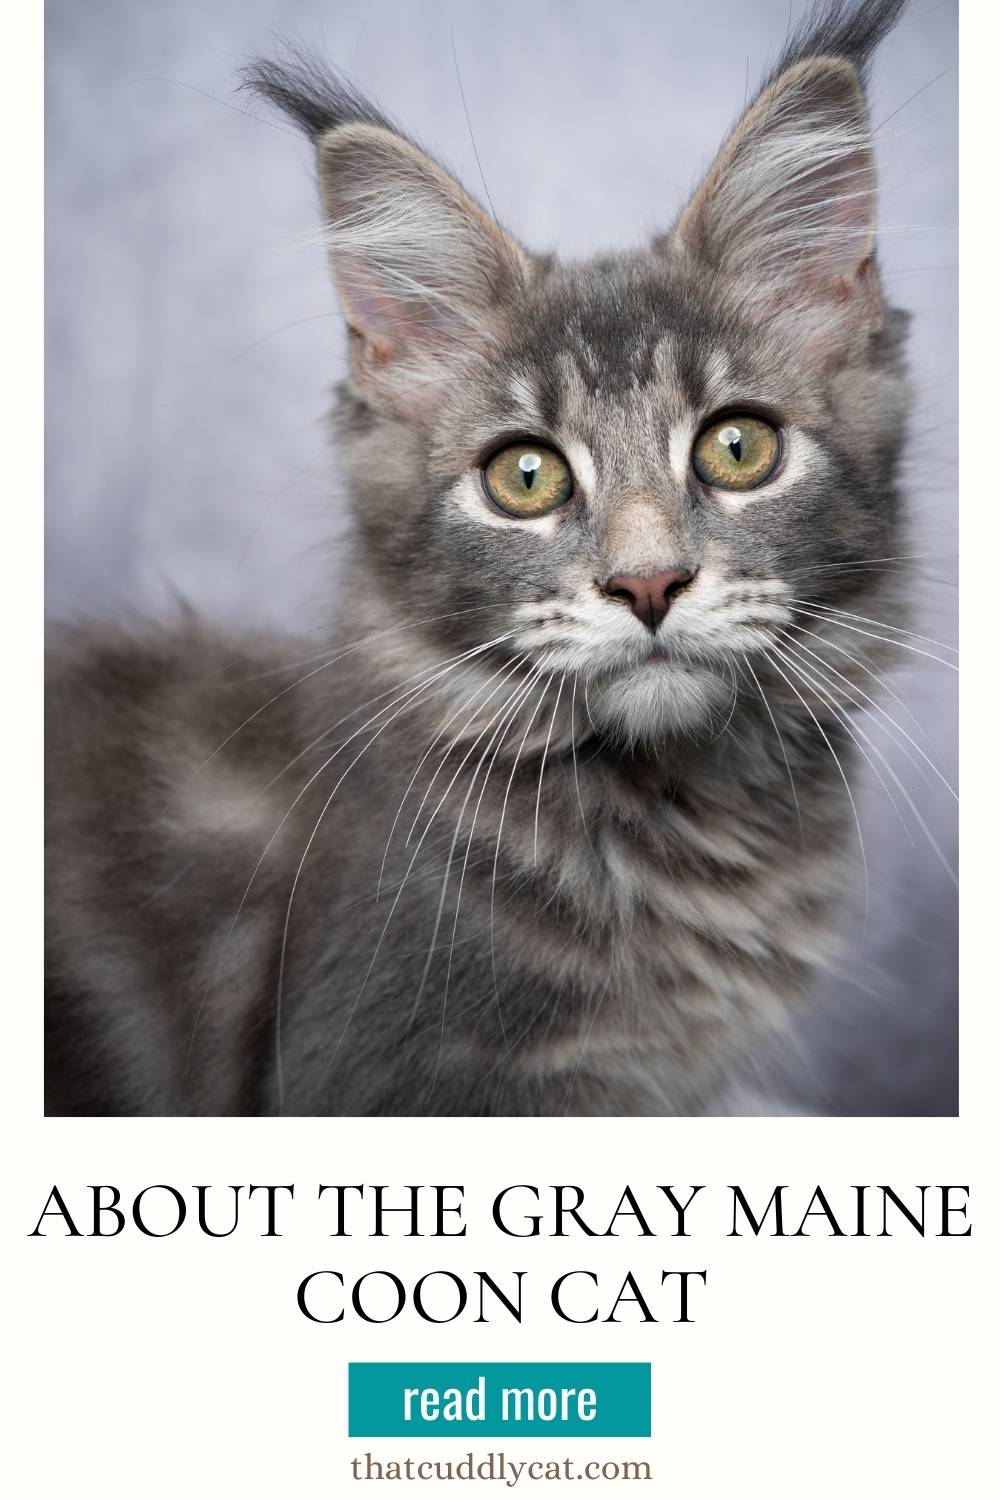  Gray Maine Coon